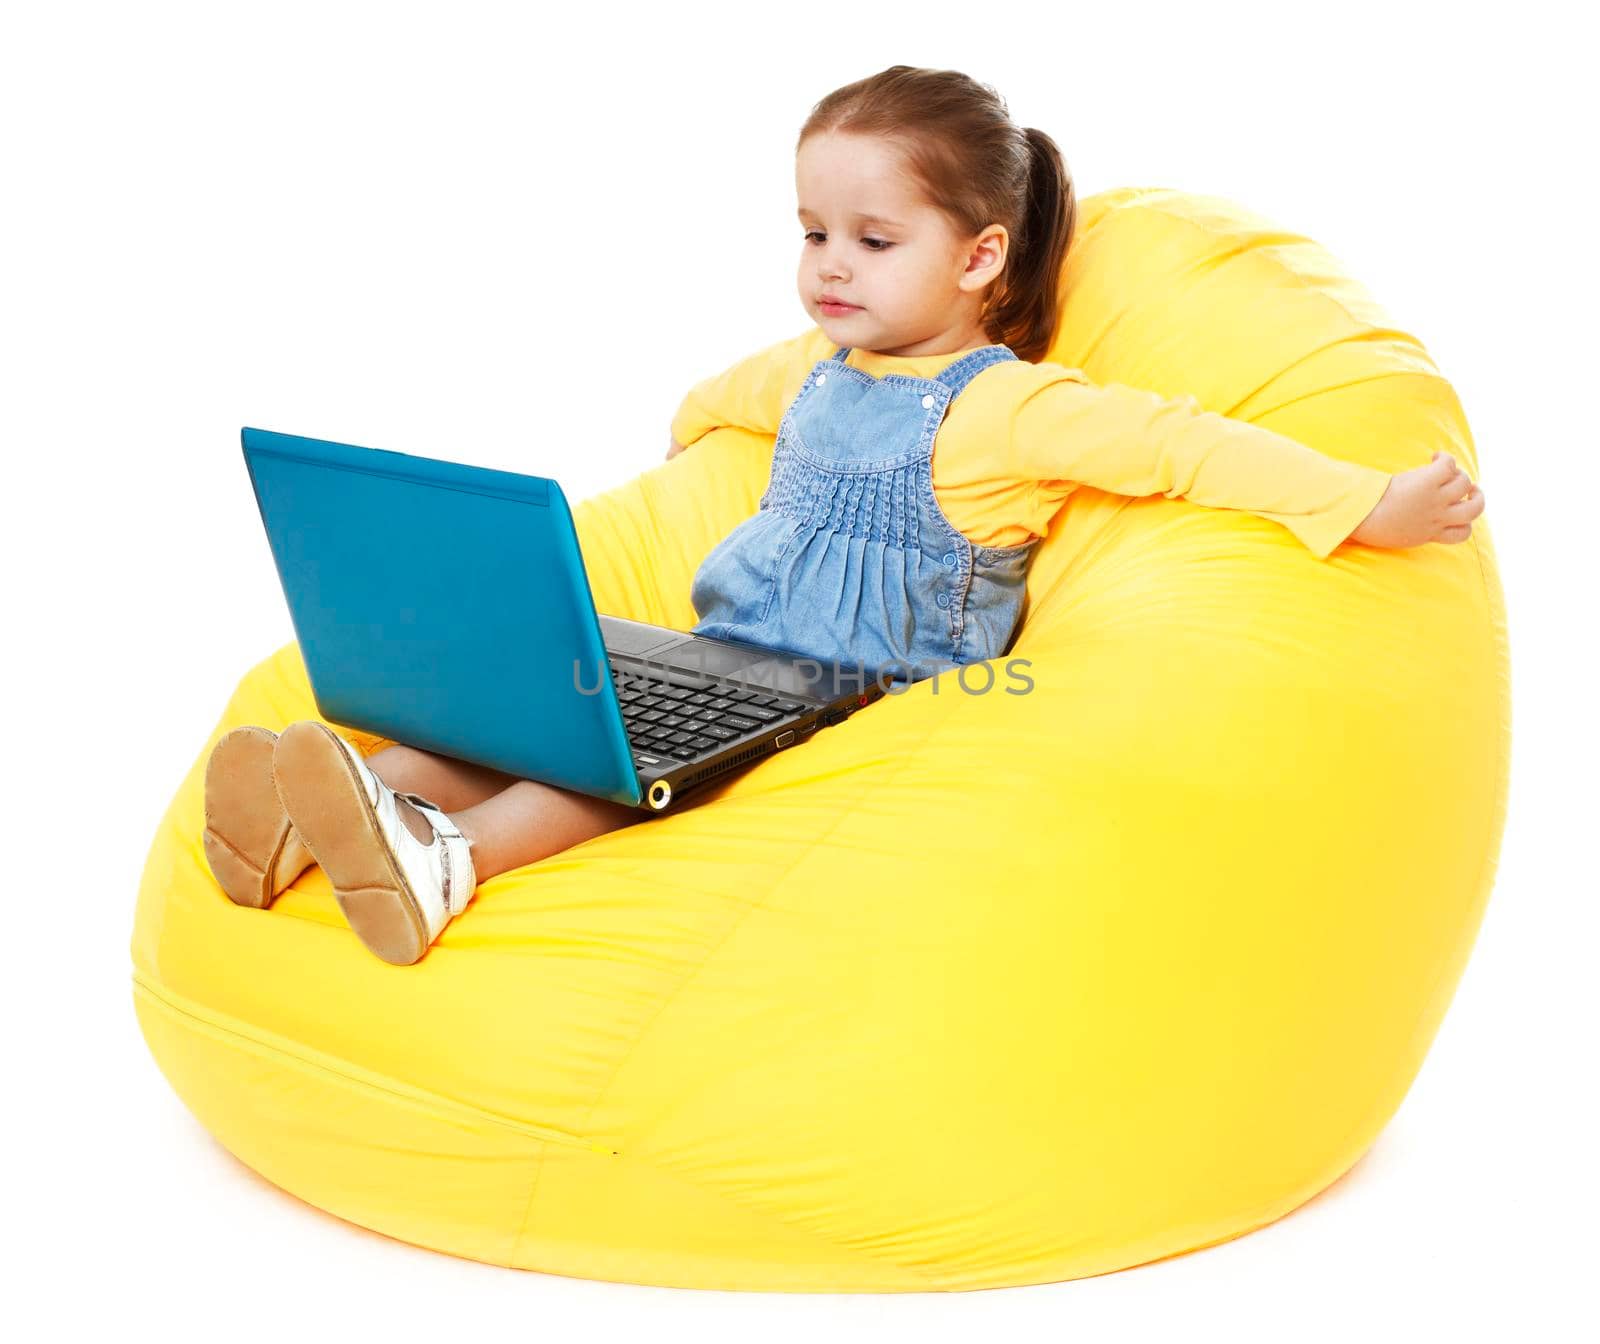 Child sitting on a bean bag with laptop - Stock Image by Jyliana